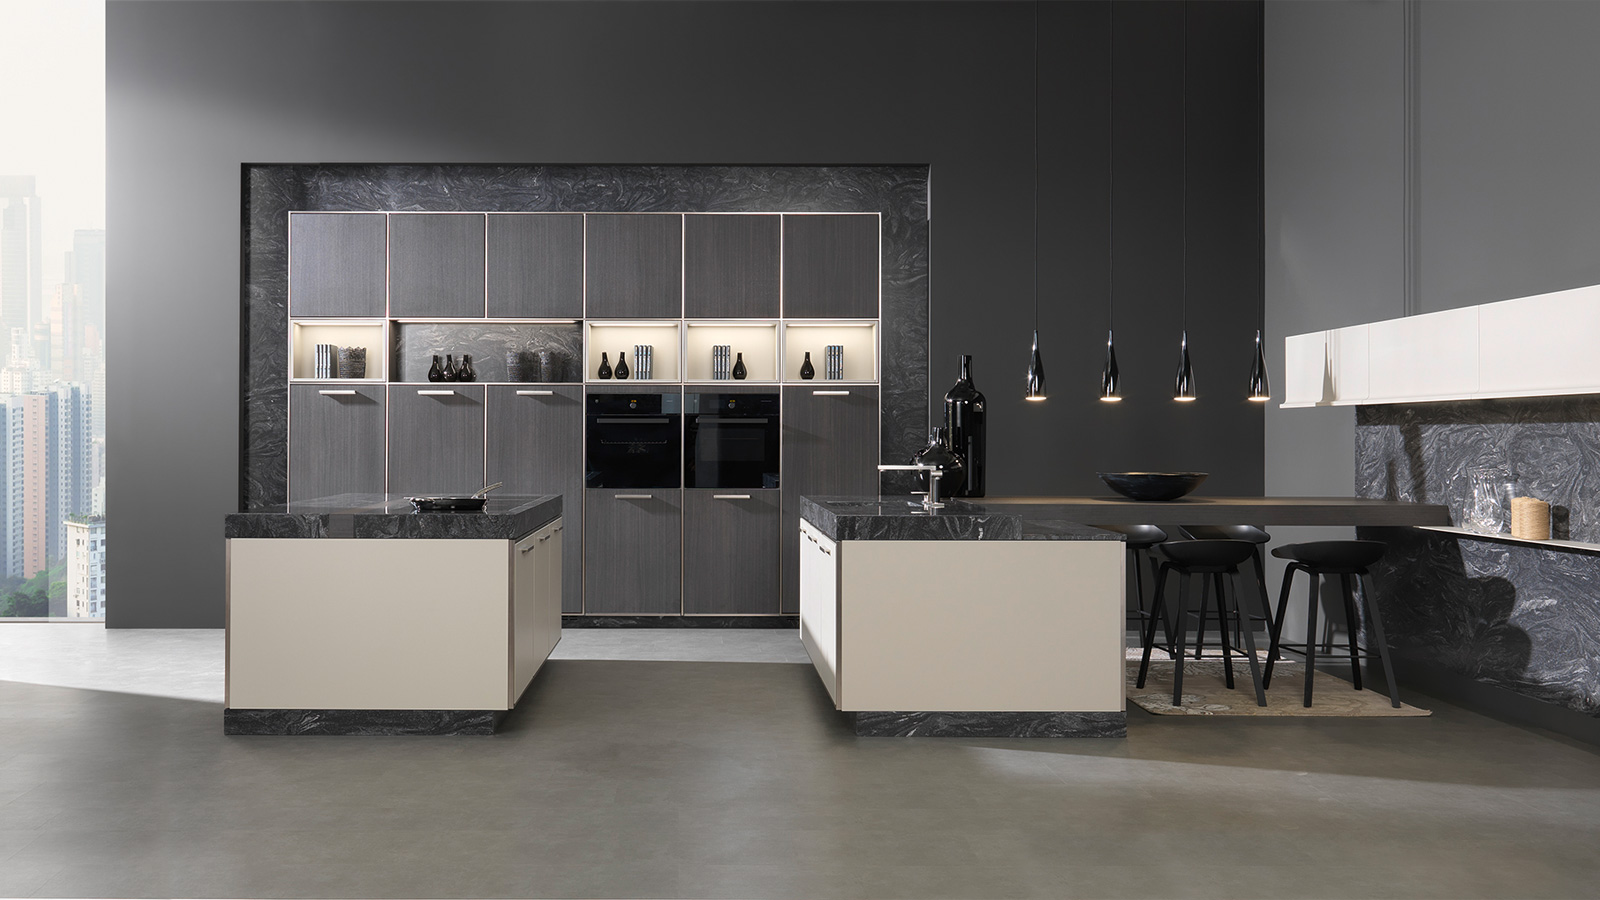 Rational unveils two ranges for 2019